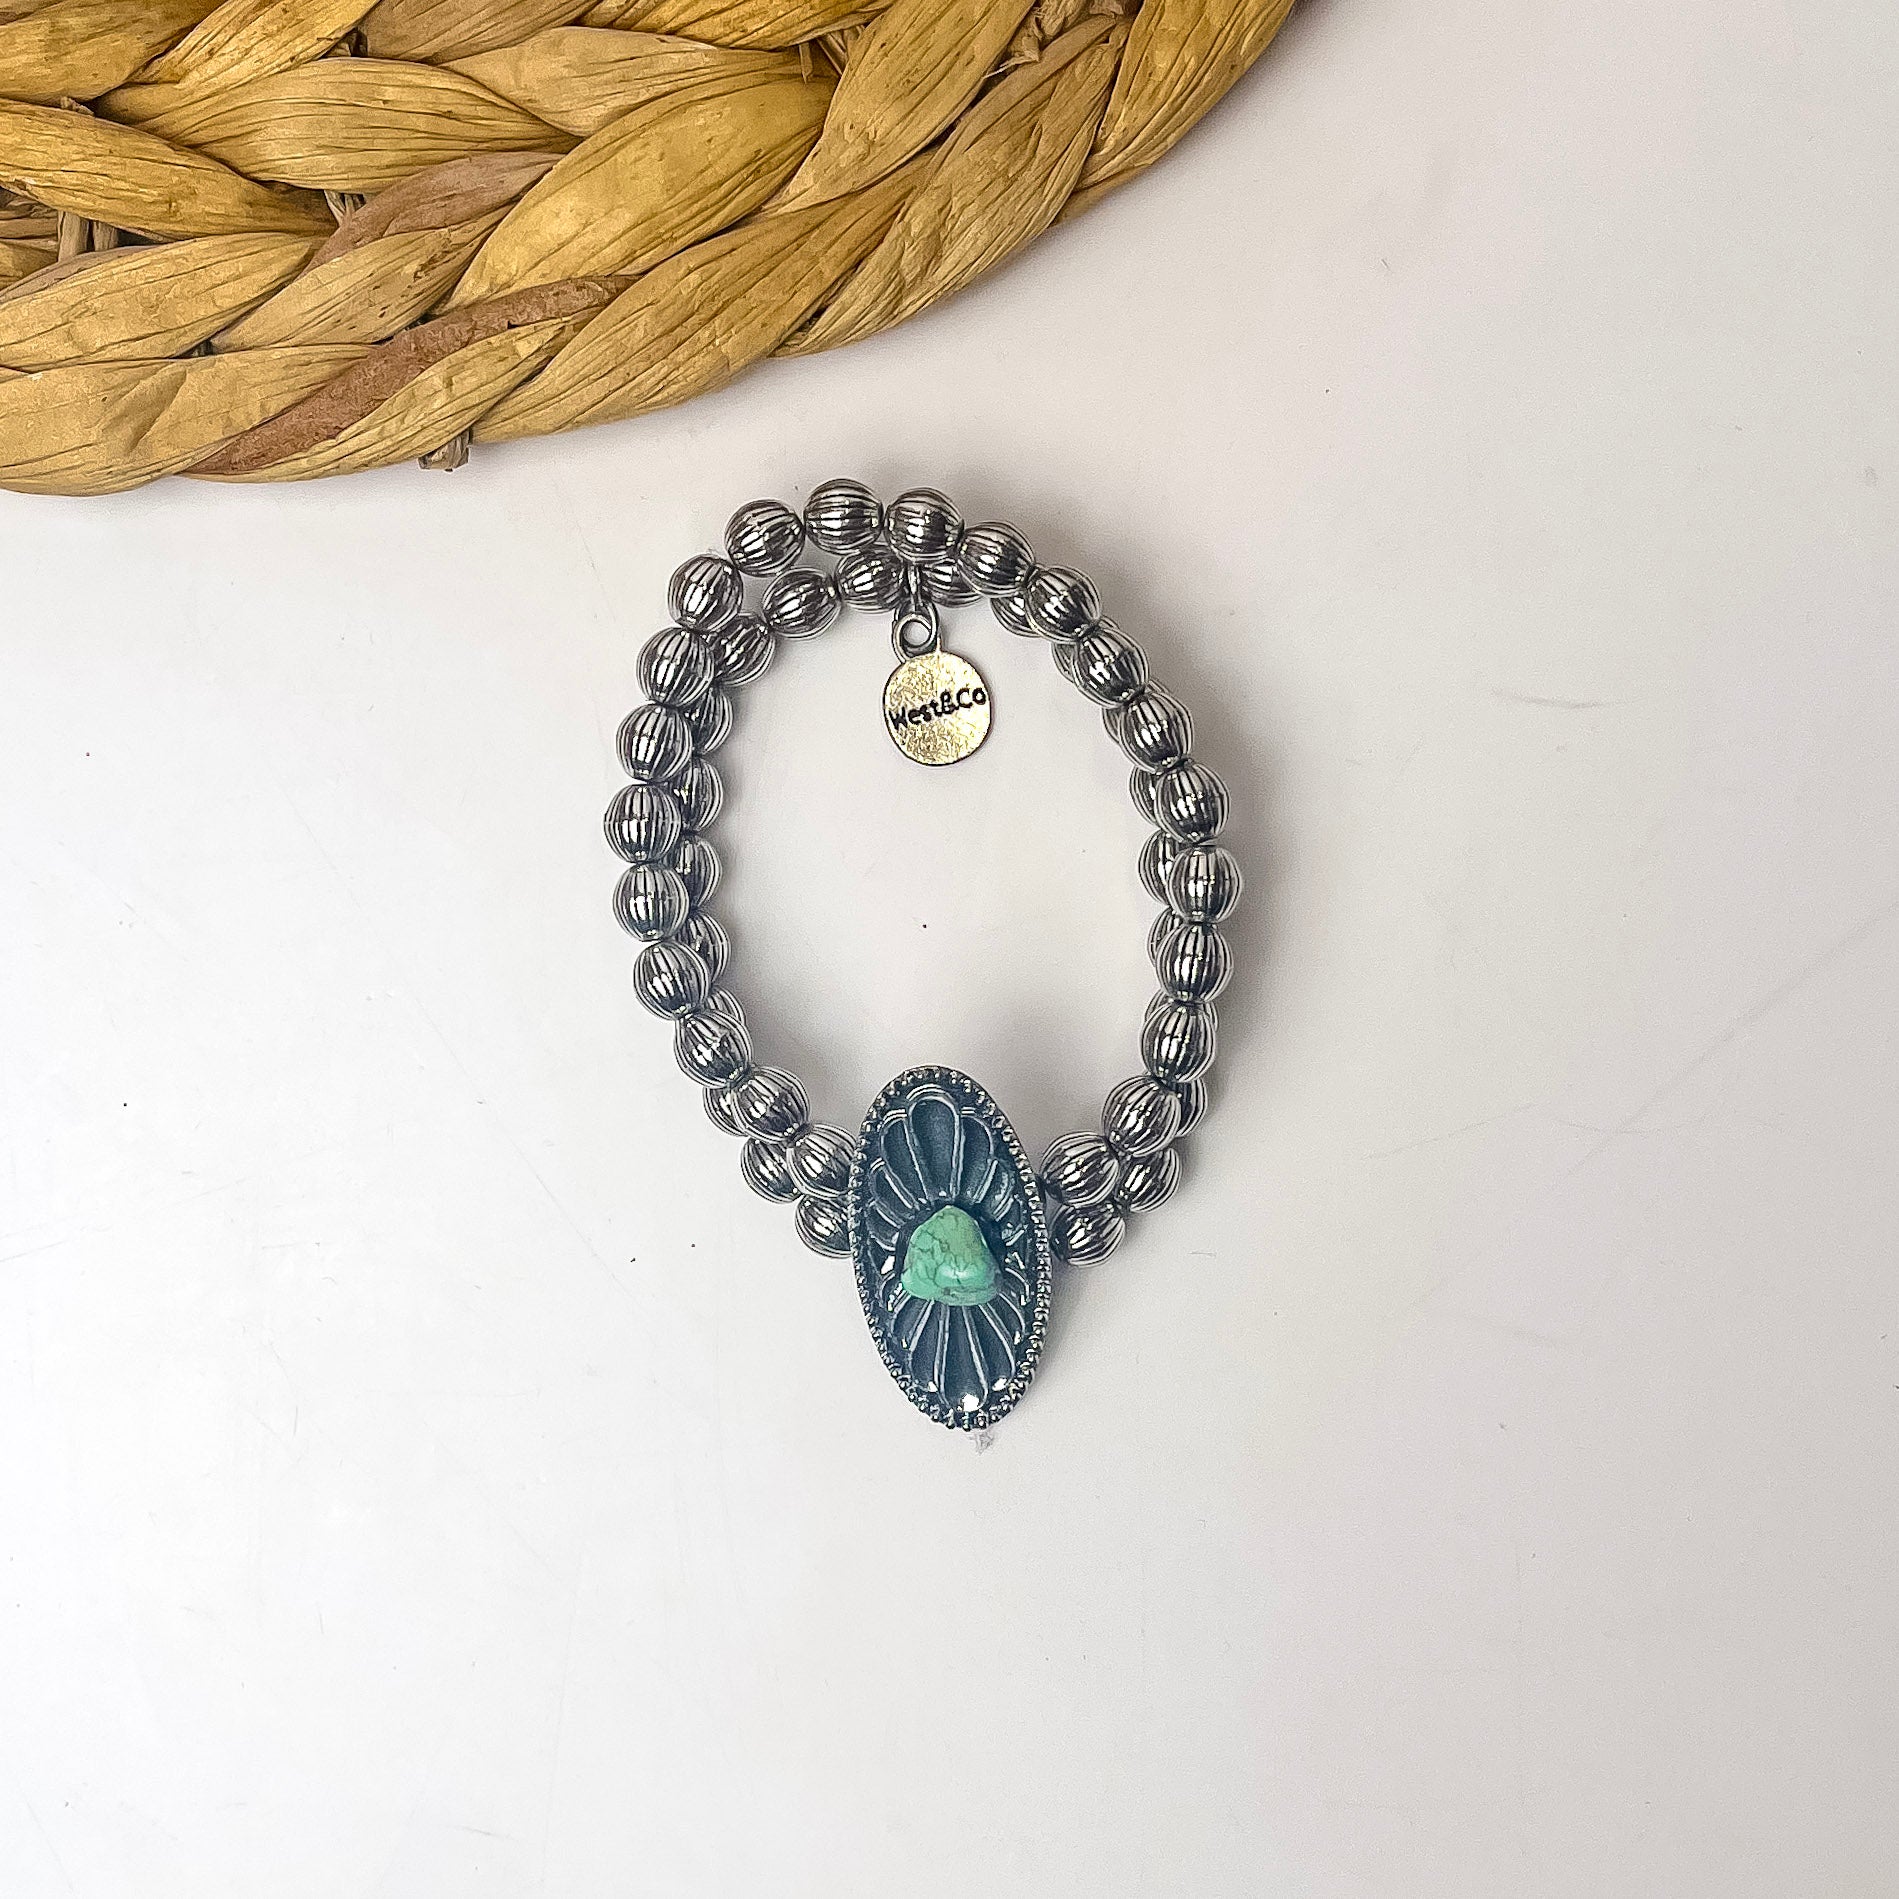 Beaded Bracelet With Oval Pendant and Green Turquoise Stone in Silver Tone - Giddy Up Glamour Boutique